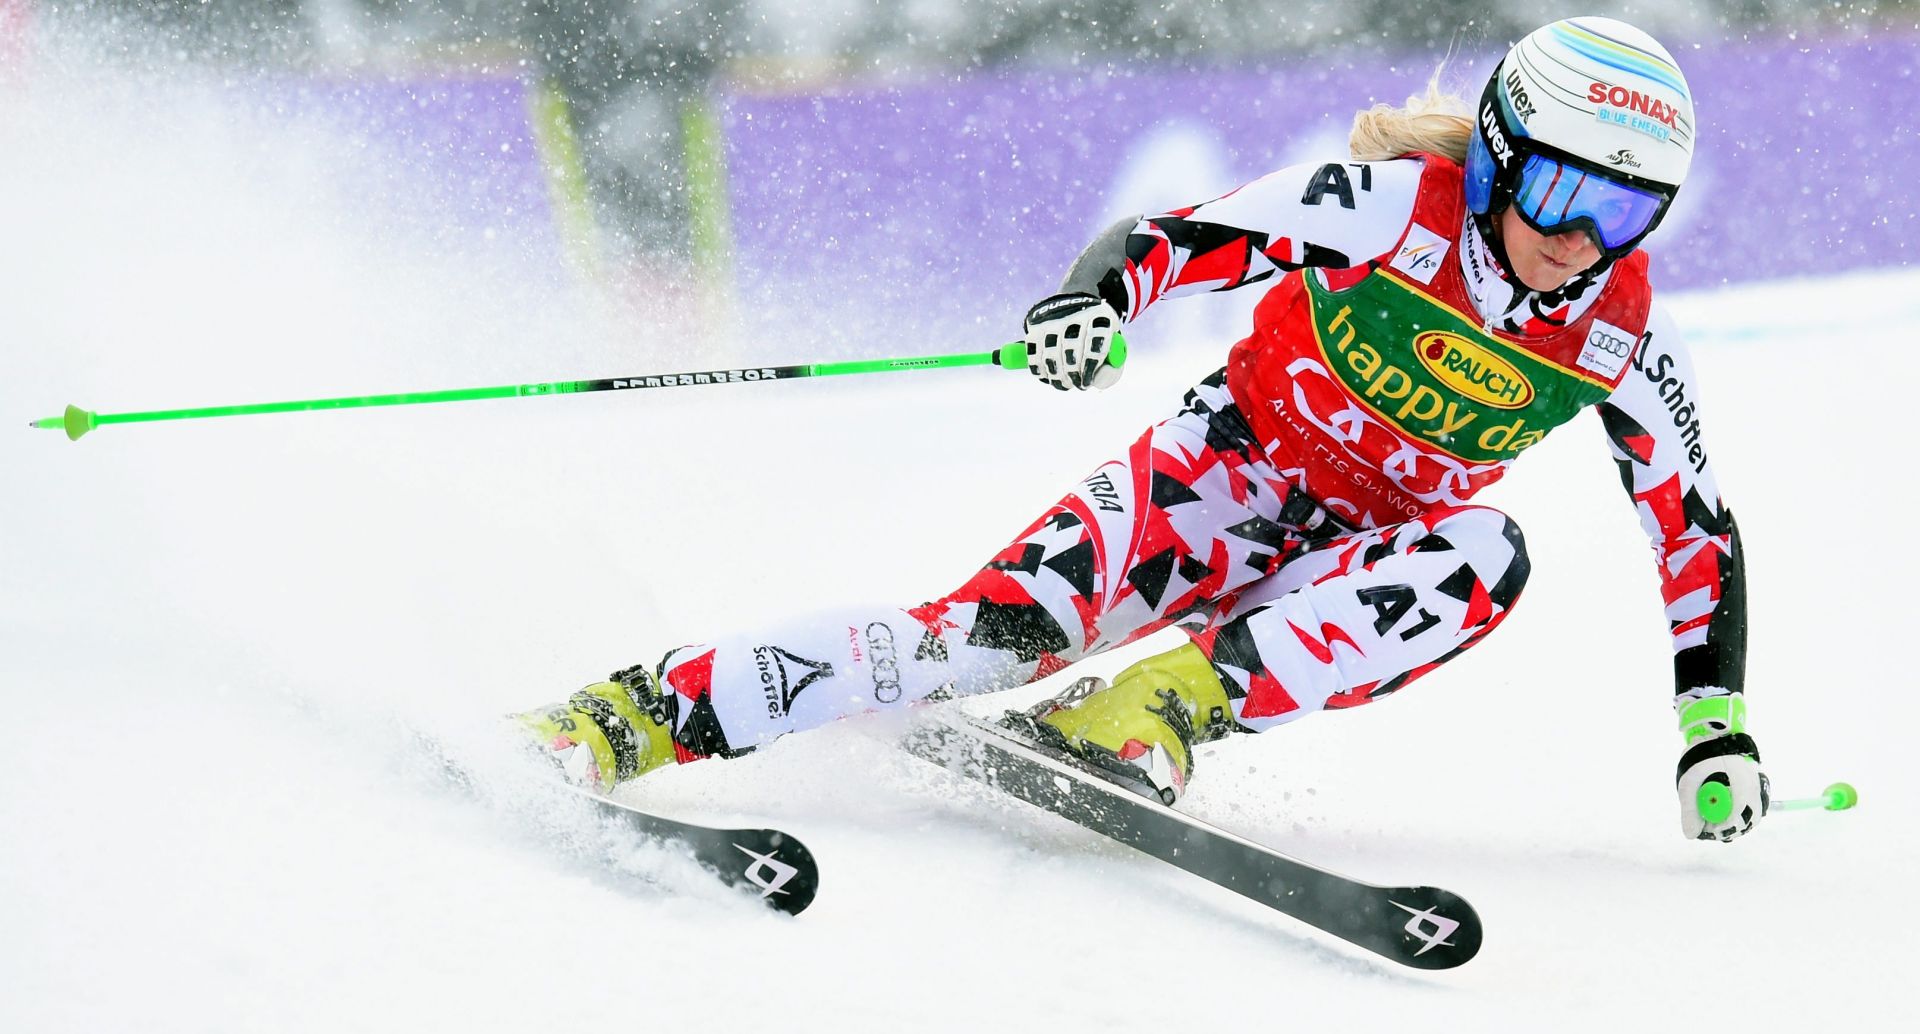 epa05198984 Eva-Maria Brem of Austria in action during the Women's Alpine Giant Slalom first run of the Alpine Skiing World Cup in Jasna, Slovakia, 07 March 2016.  EPA/VASSIL DONEV